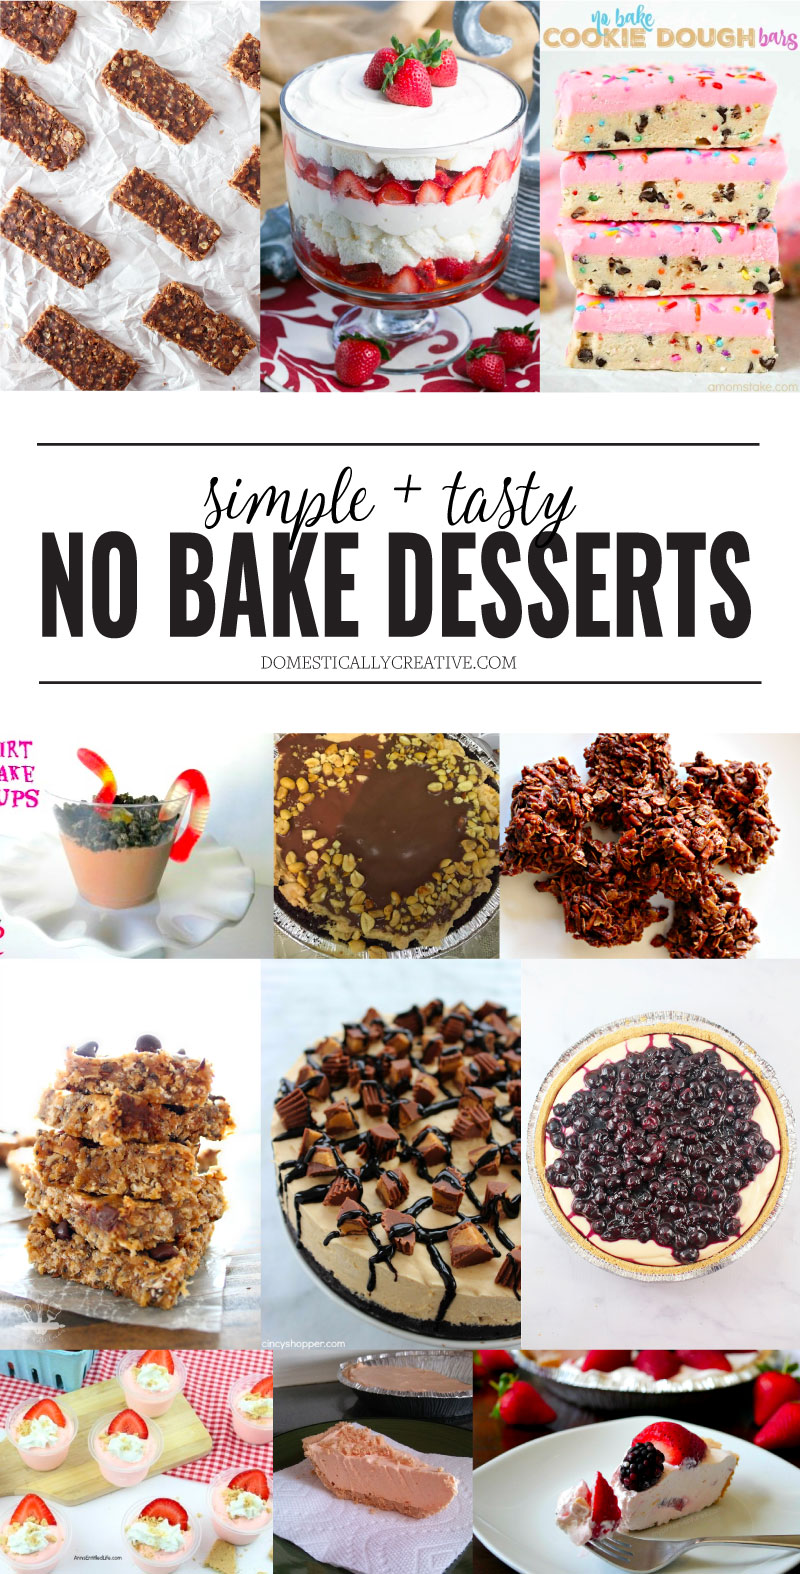 Simple and Tasty No Bake Desserts